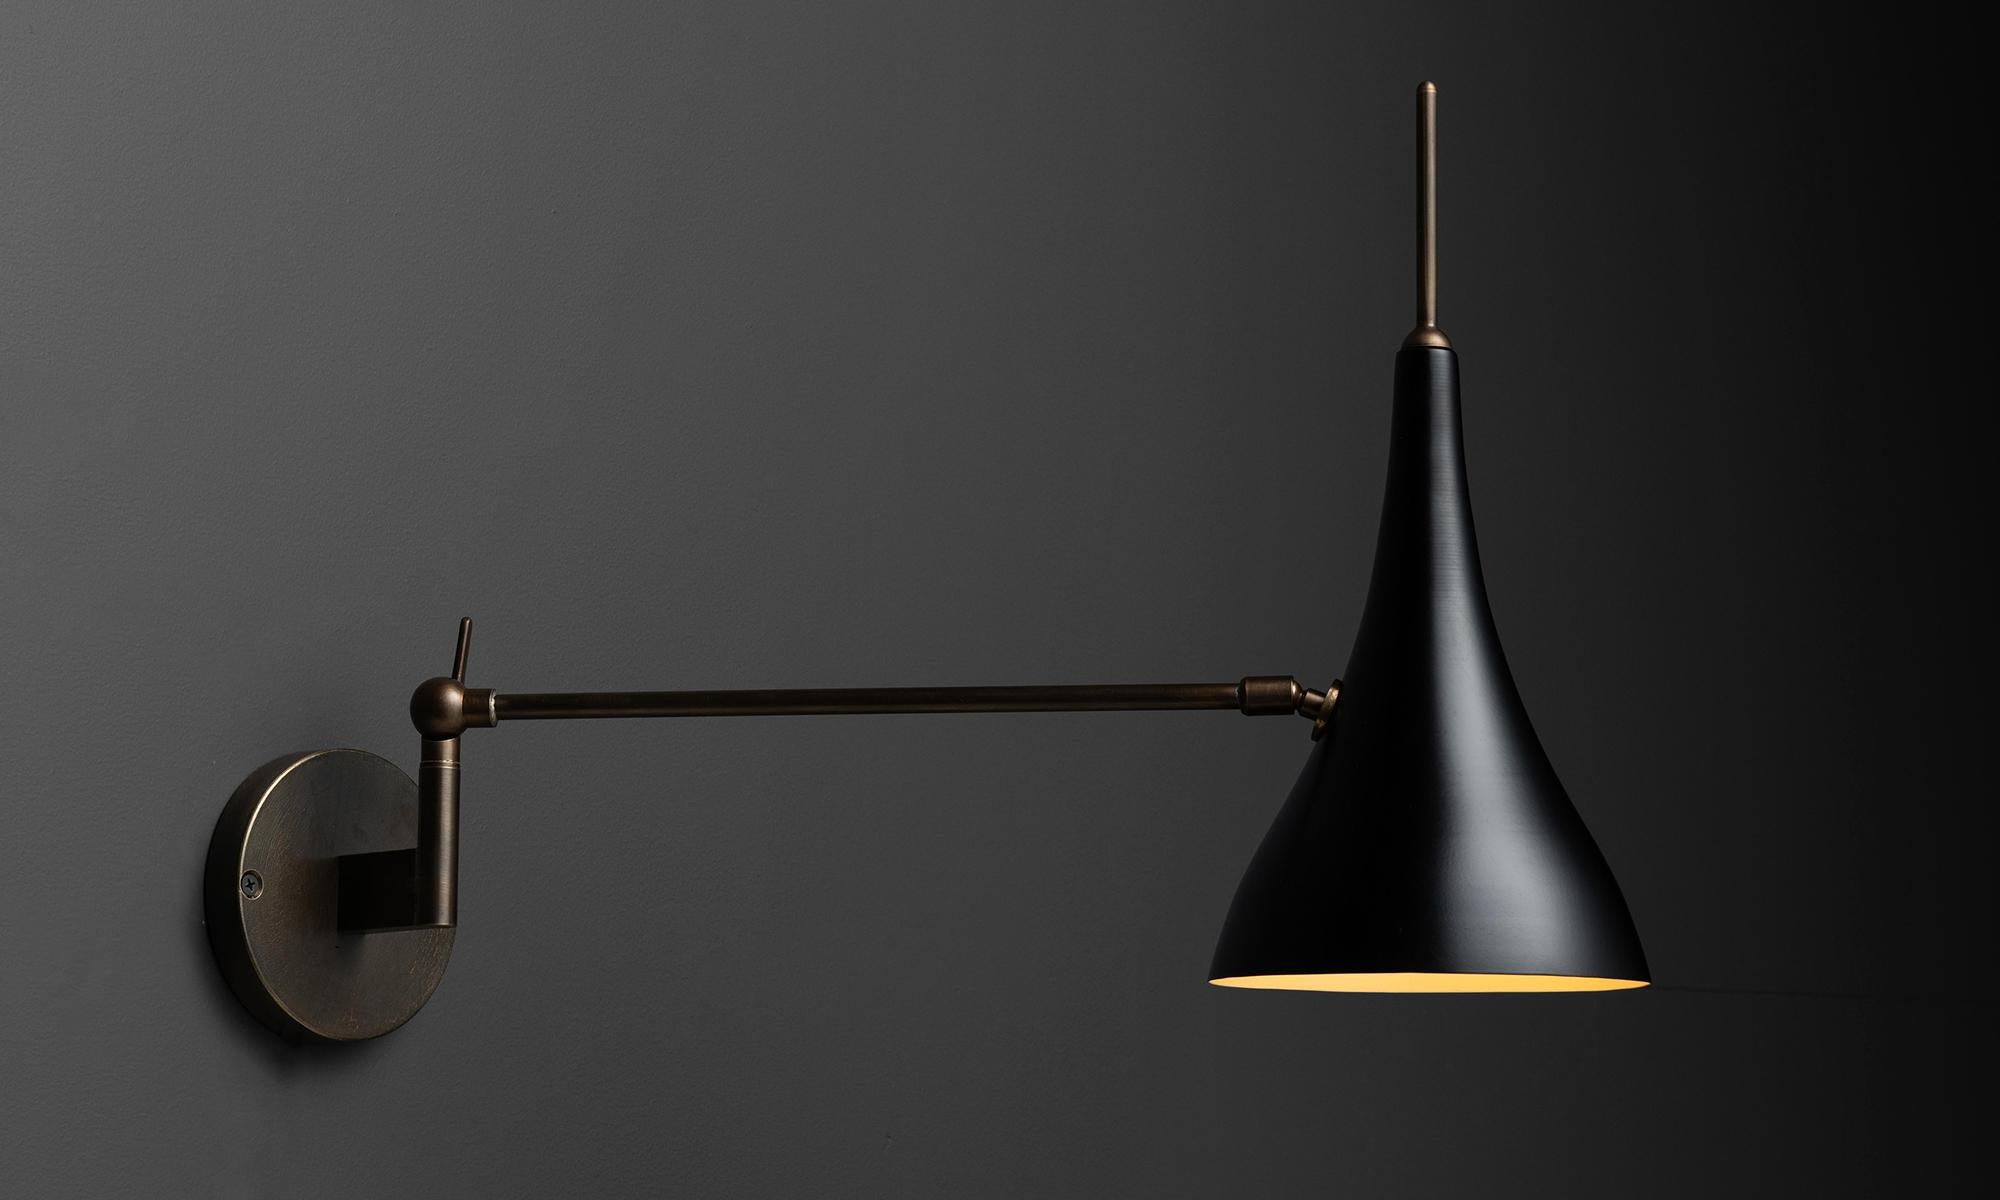 Articulating wall sconce

Made in Italy

Black metal & brass fixture, pivots left to right as well as the shade moves in all directions.

Measures: 6.5”w x 21”d x 16”h.